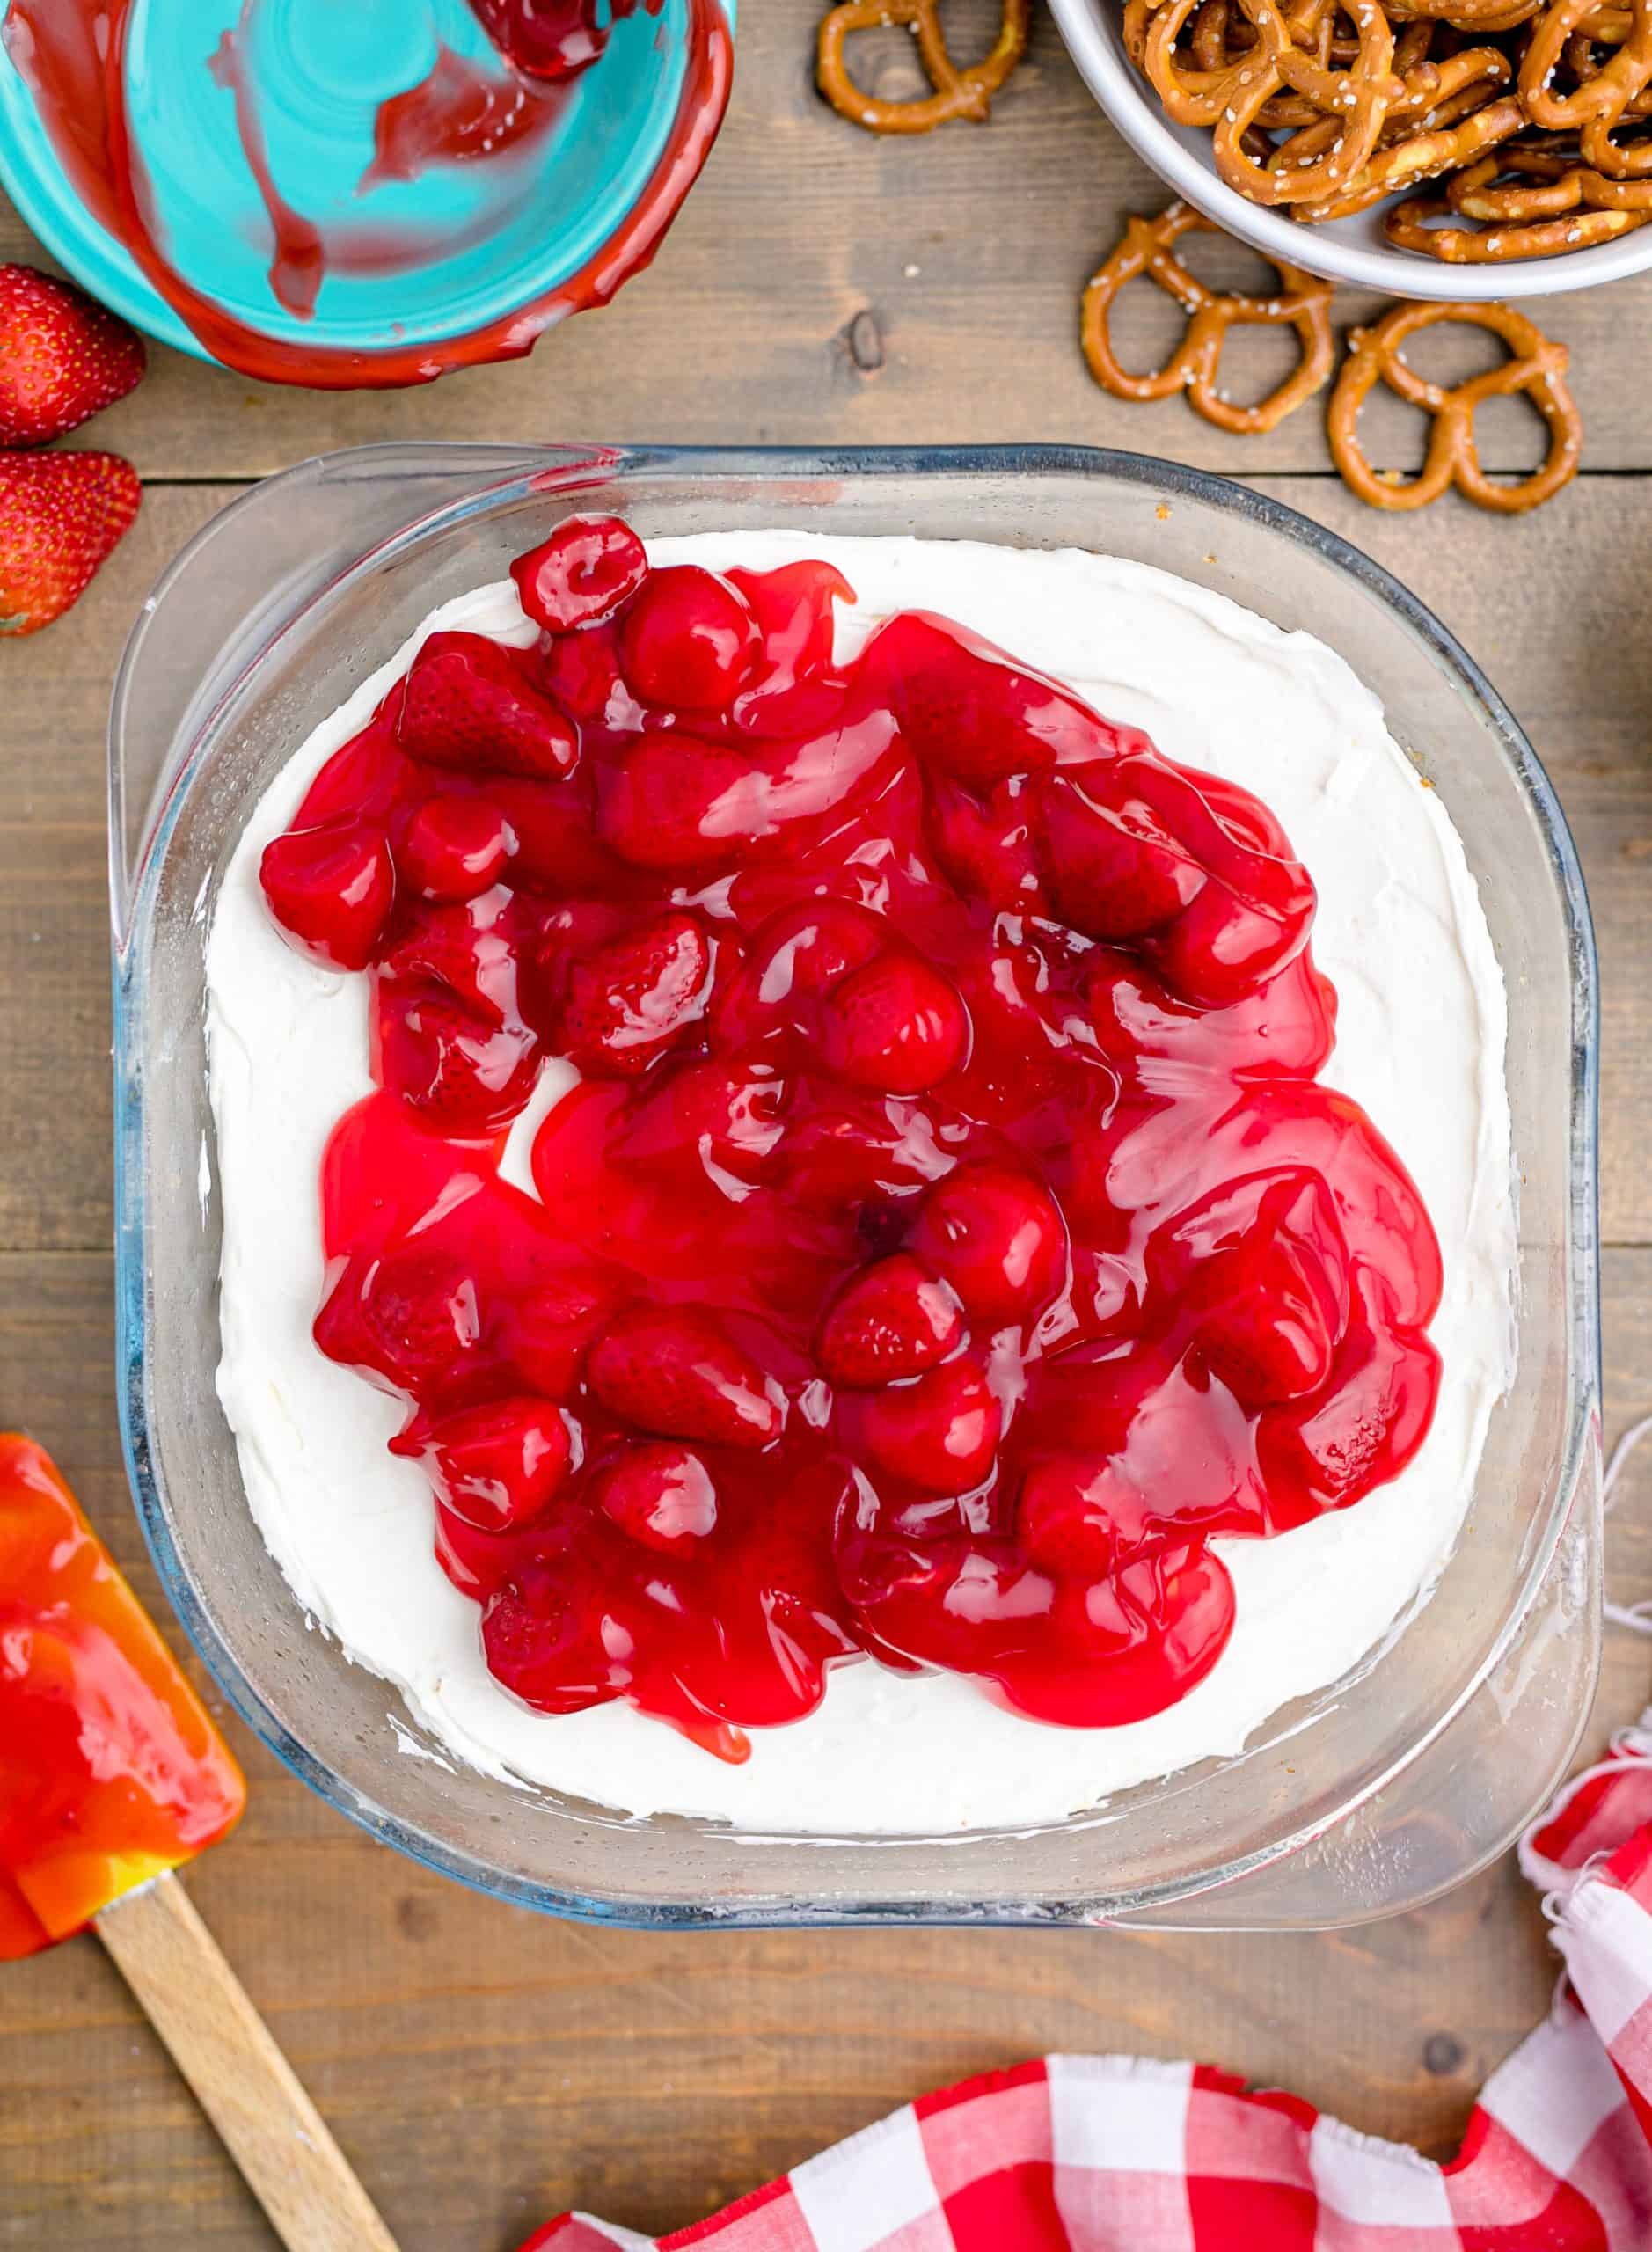 Strawberries added on top of cream cheese mixture in baking dish.